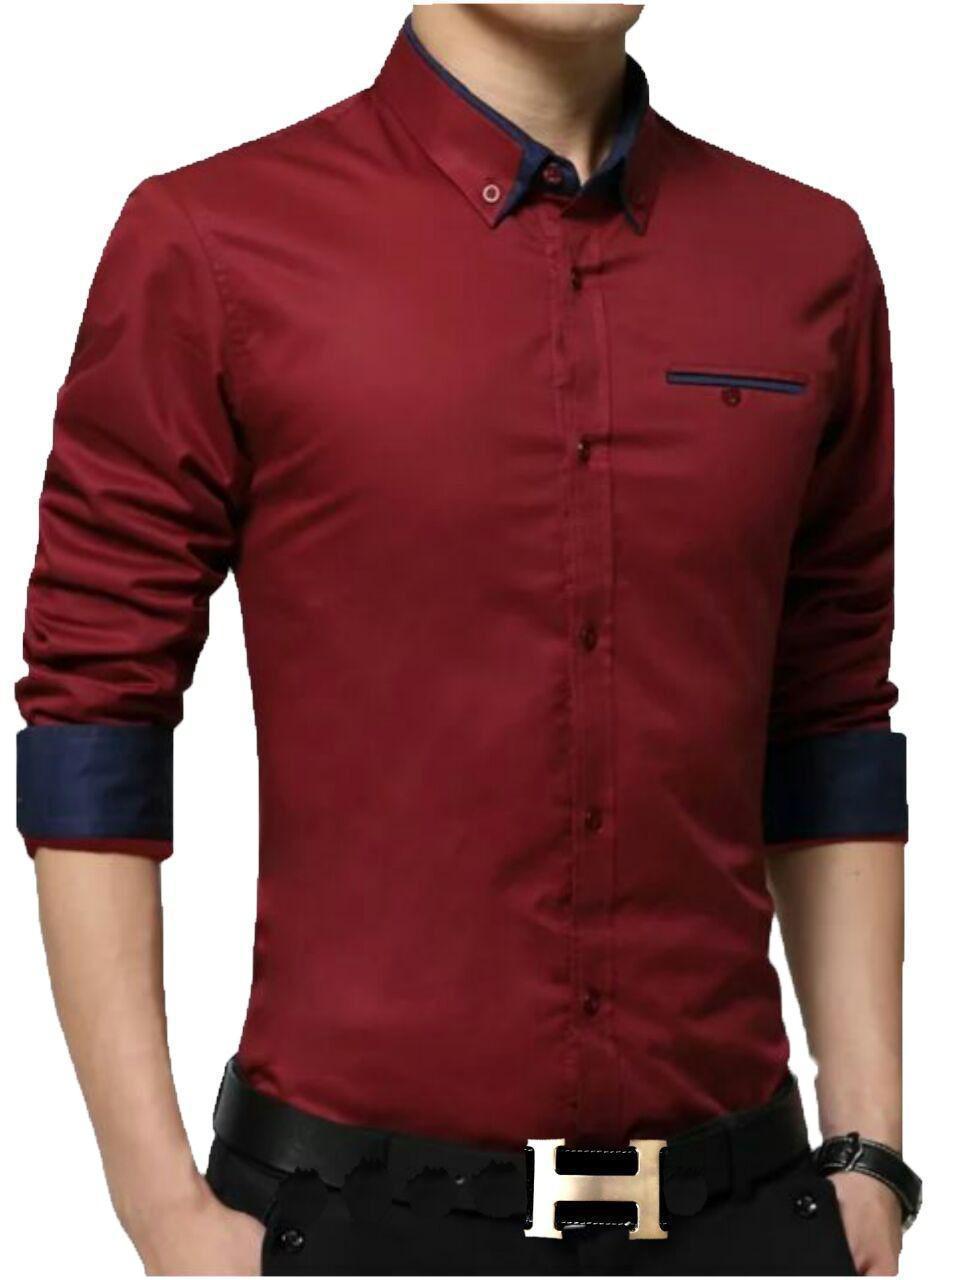 Exclusive Designer Maroon Cotton Casual Solid Shirt for Men - TryBuy® USA🇺🇸